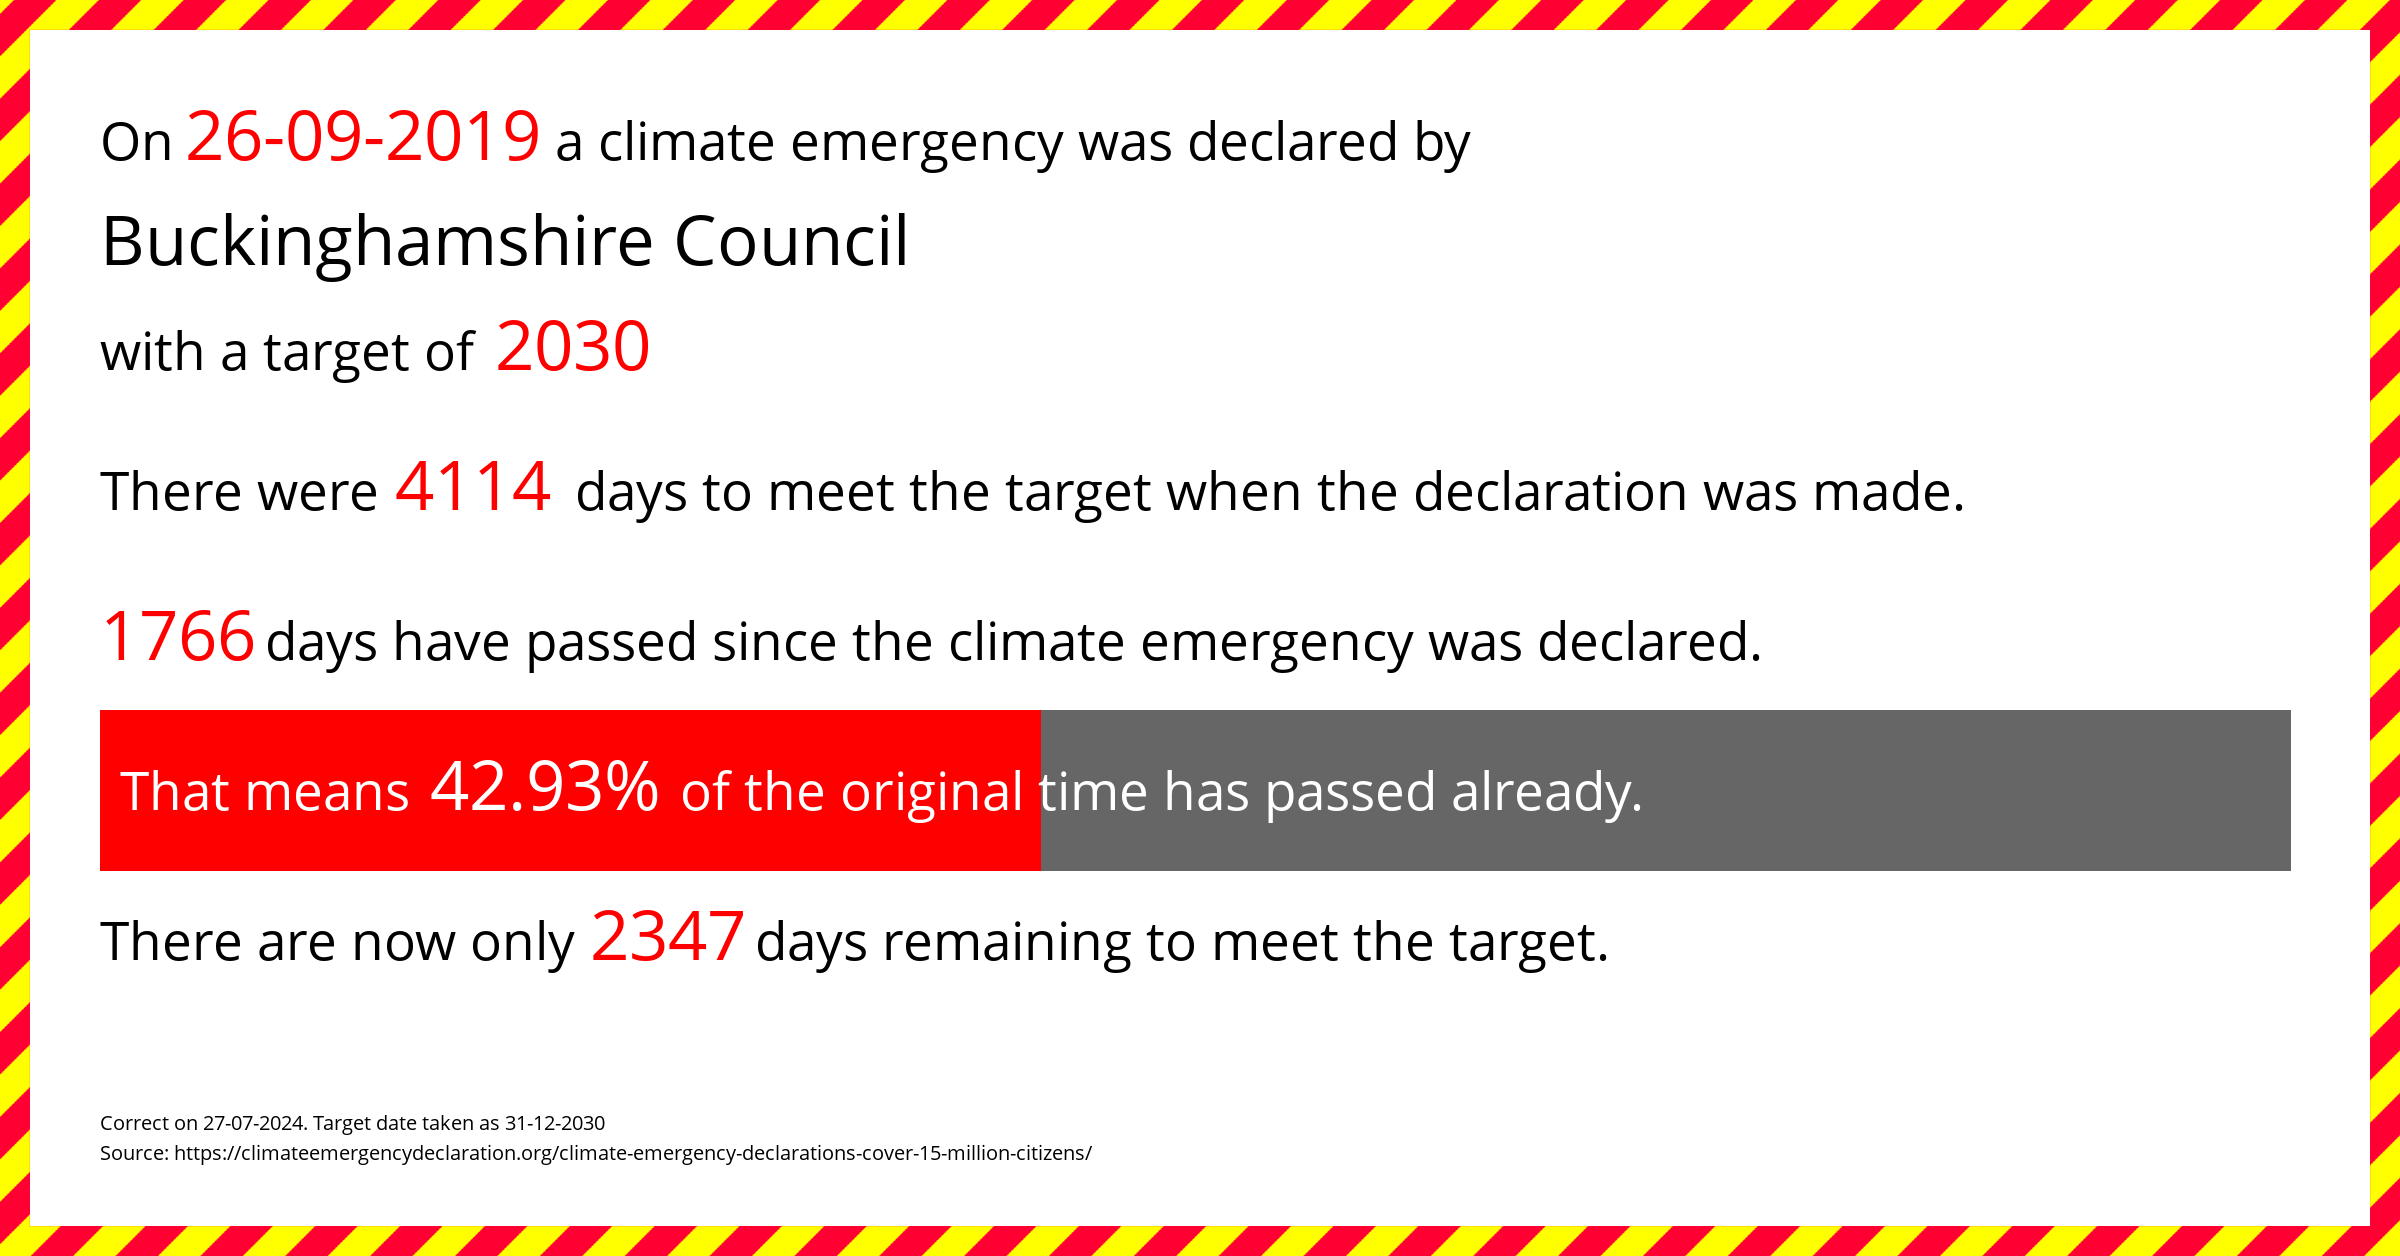 Buckinghamshire Council  declared a Climate emergency on Thursday 26th September 2019, with a target of 2030.